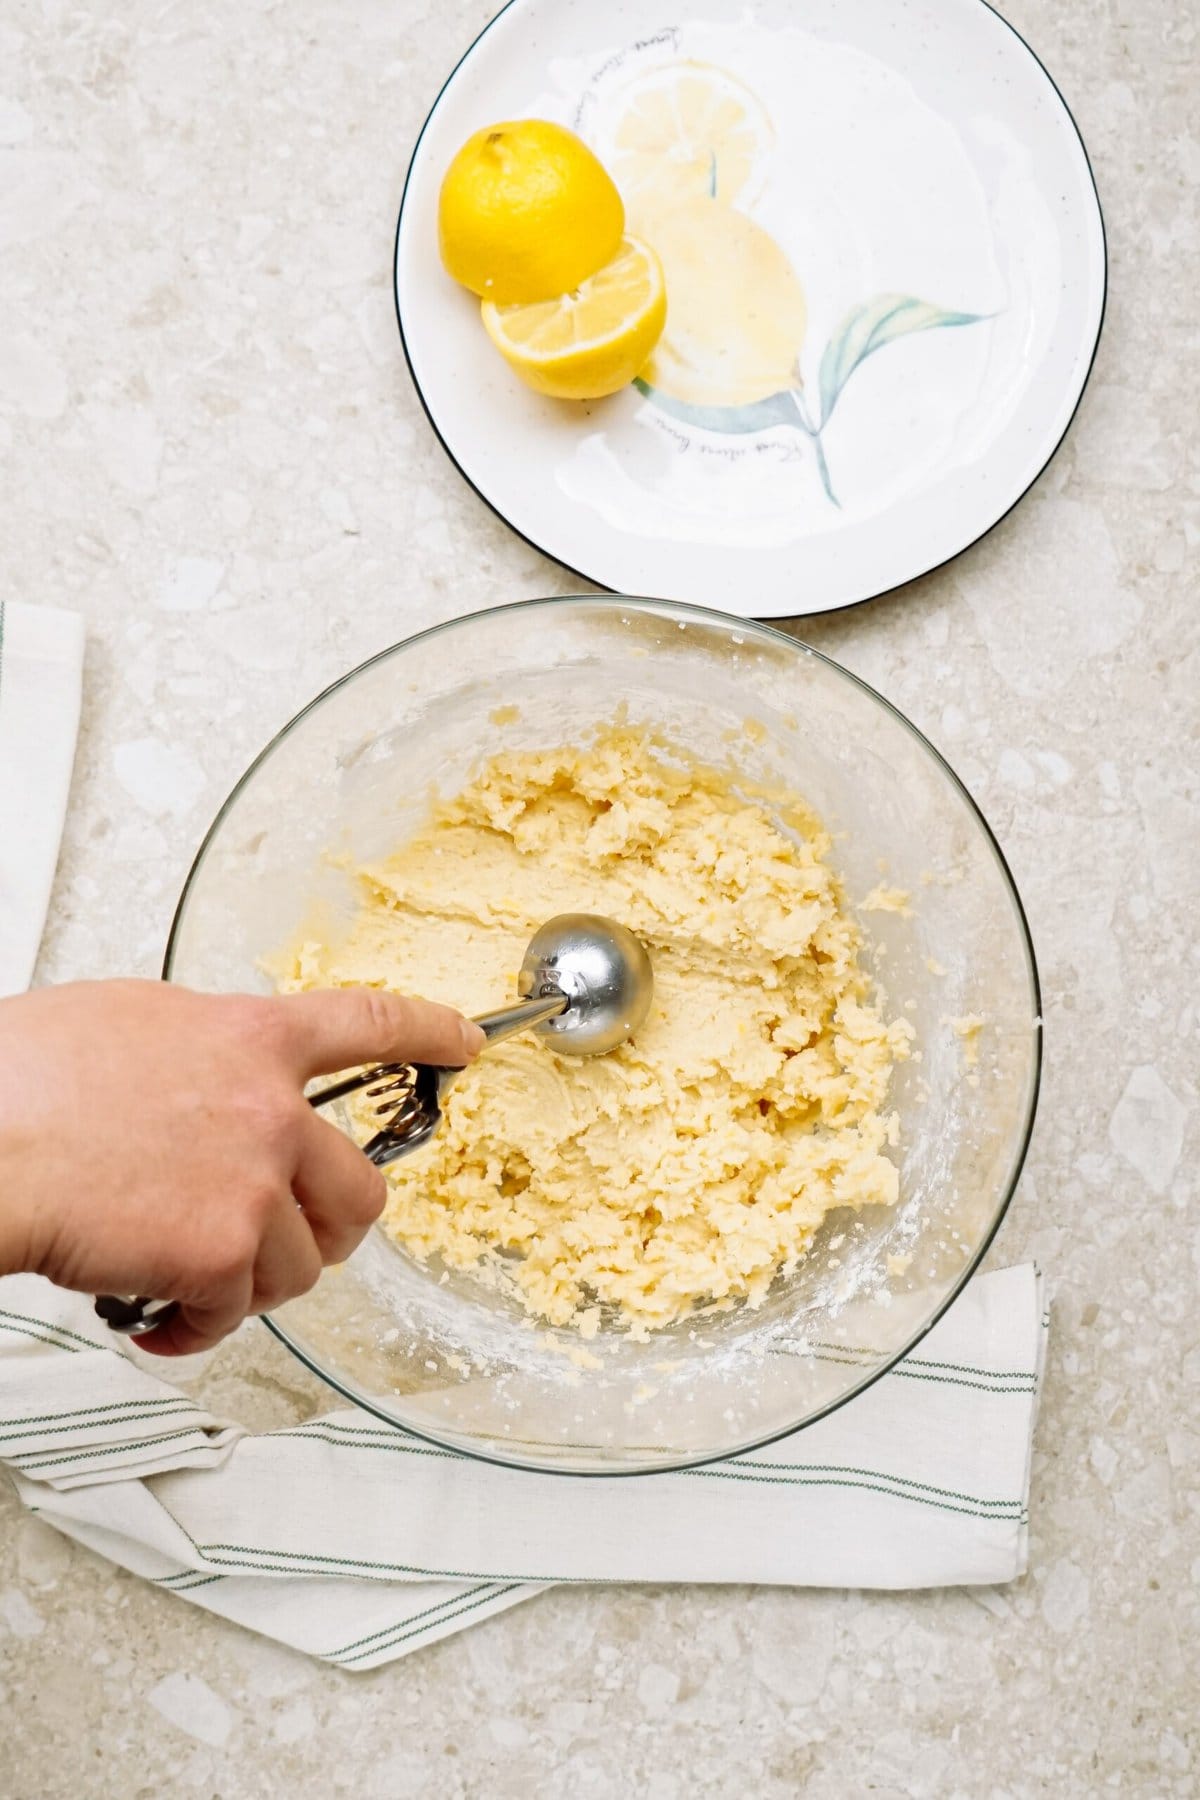 A person using an ice cream scoop to portion cookie dough into a bowl, with sliced lemons on a plate nearby.